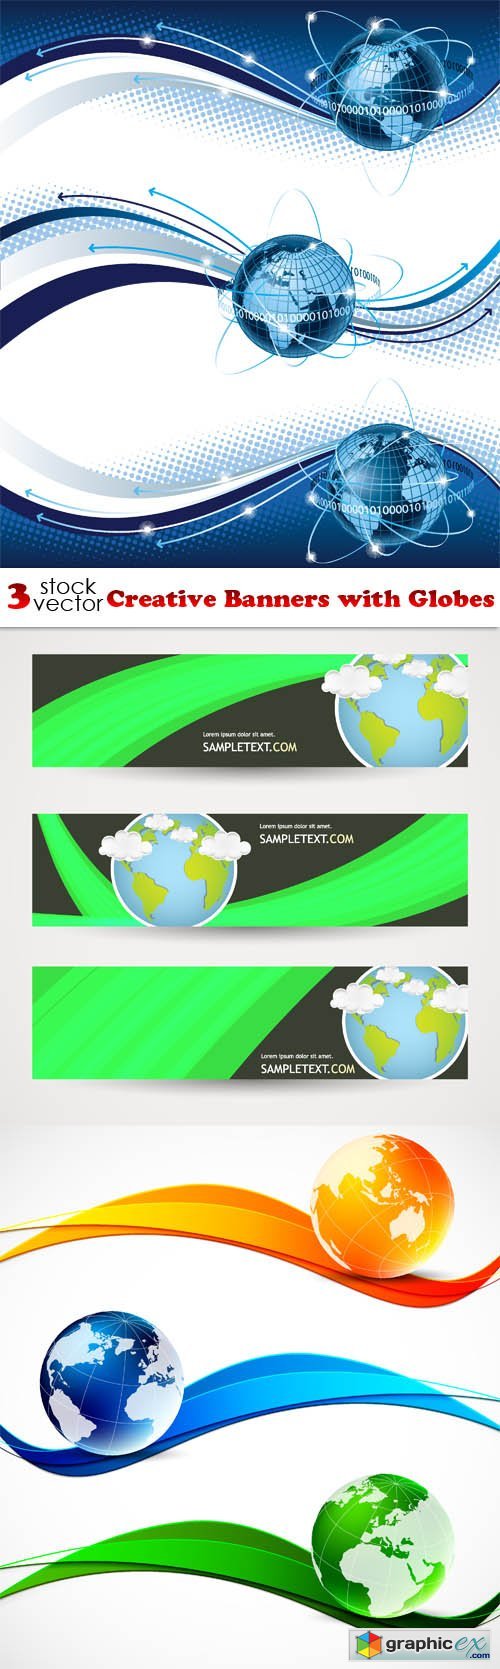 Creative Banners with Globes